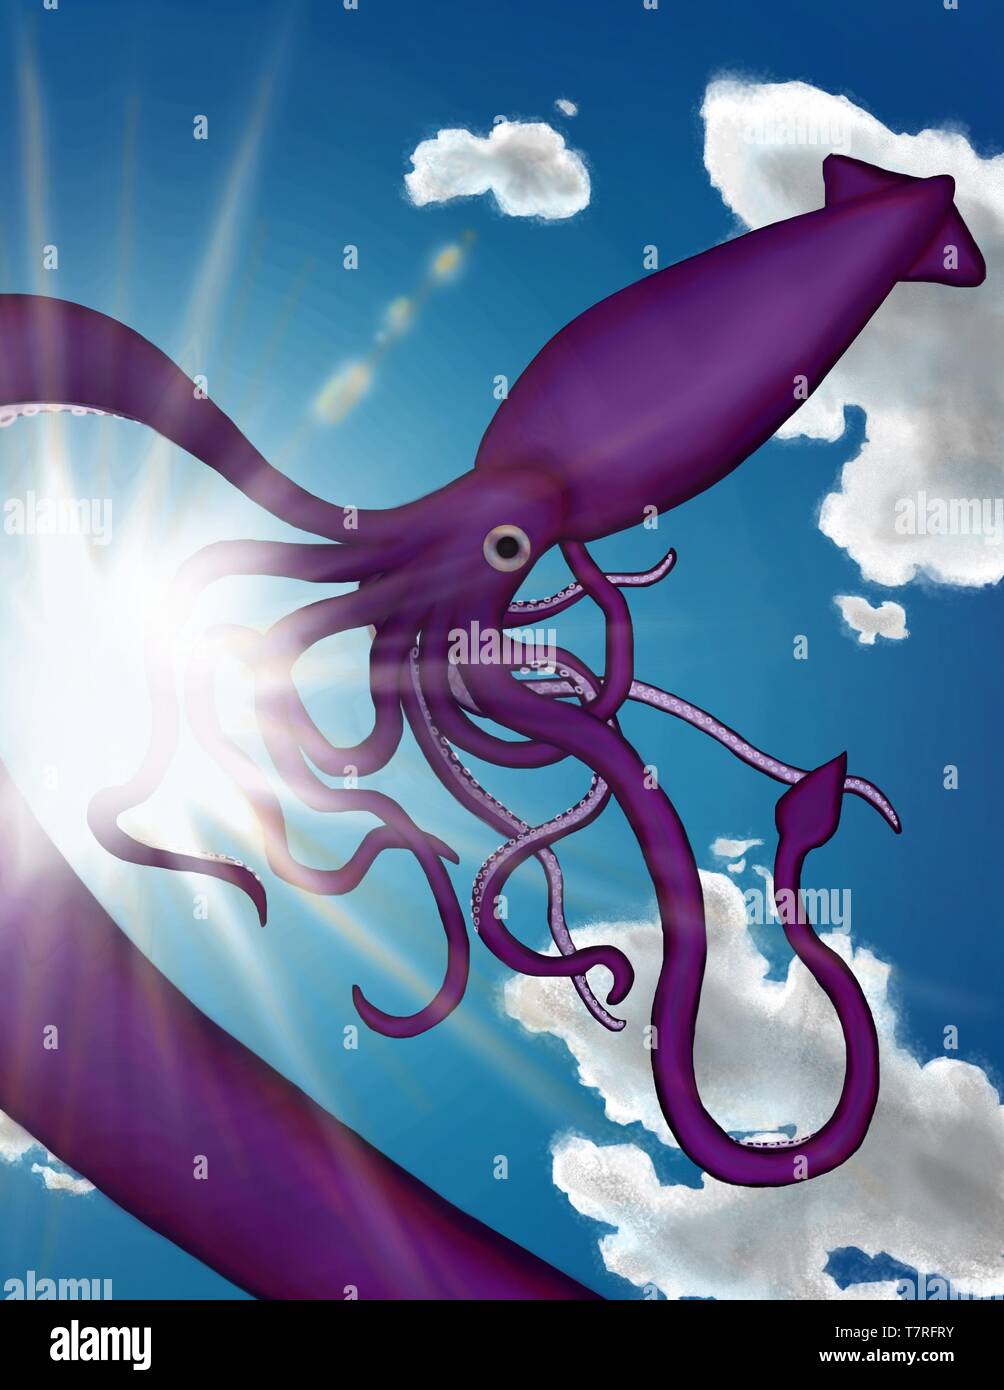 A surrealist illustration of a giant squid / kraken floating in the sky Stock Photo